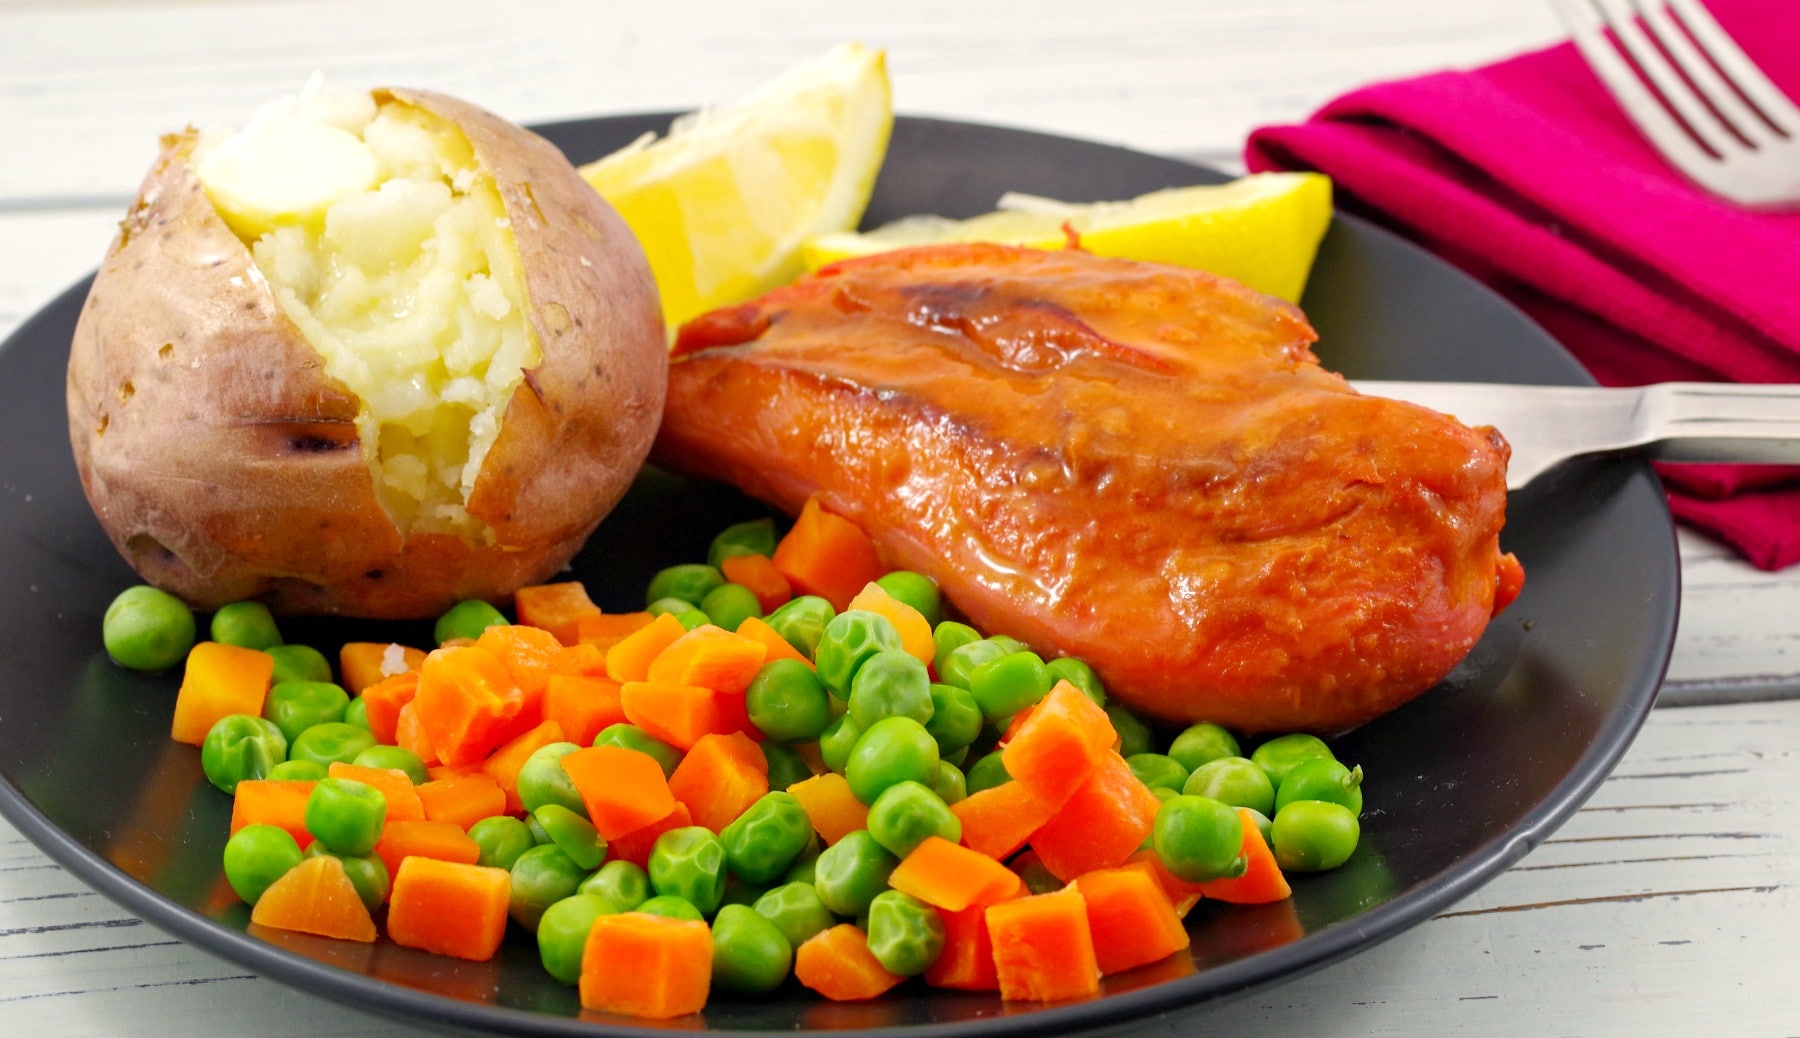 Monterey chicken on plate with baked potato and mixed vegetable